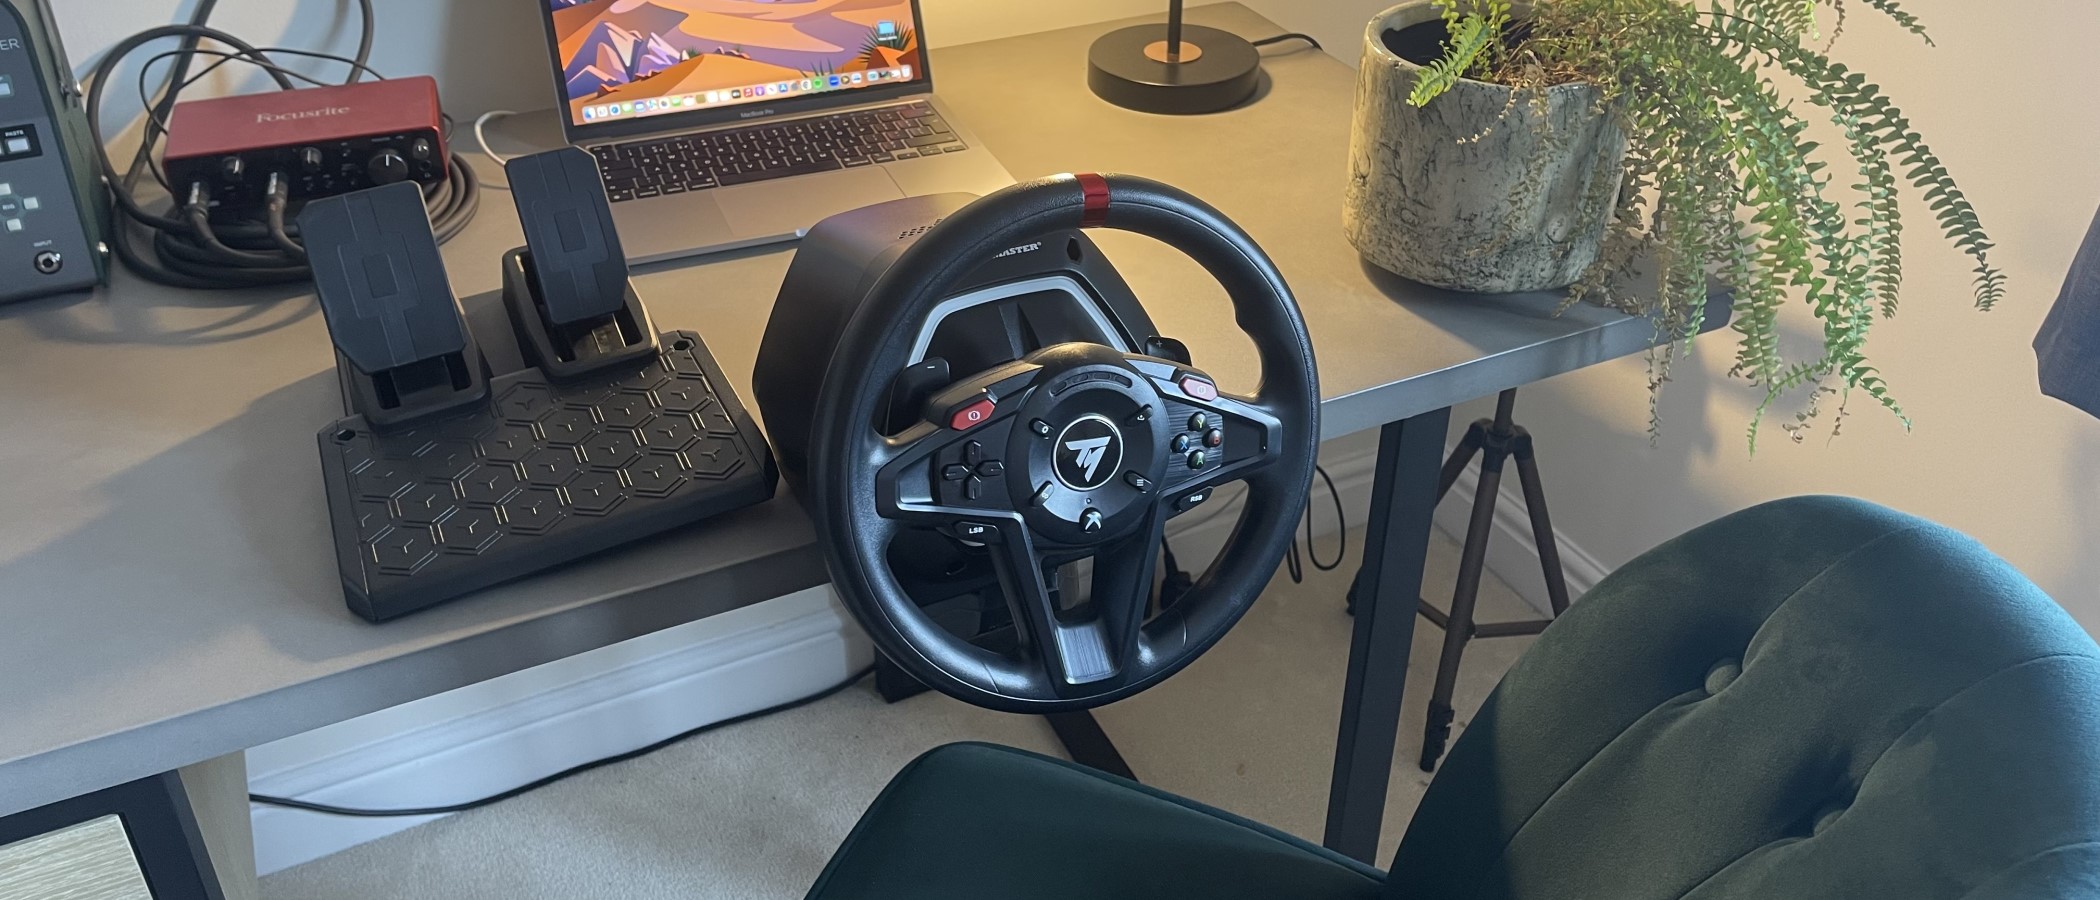 Thrustmaster T128 review: A decent option for younger or beginner sim  racers